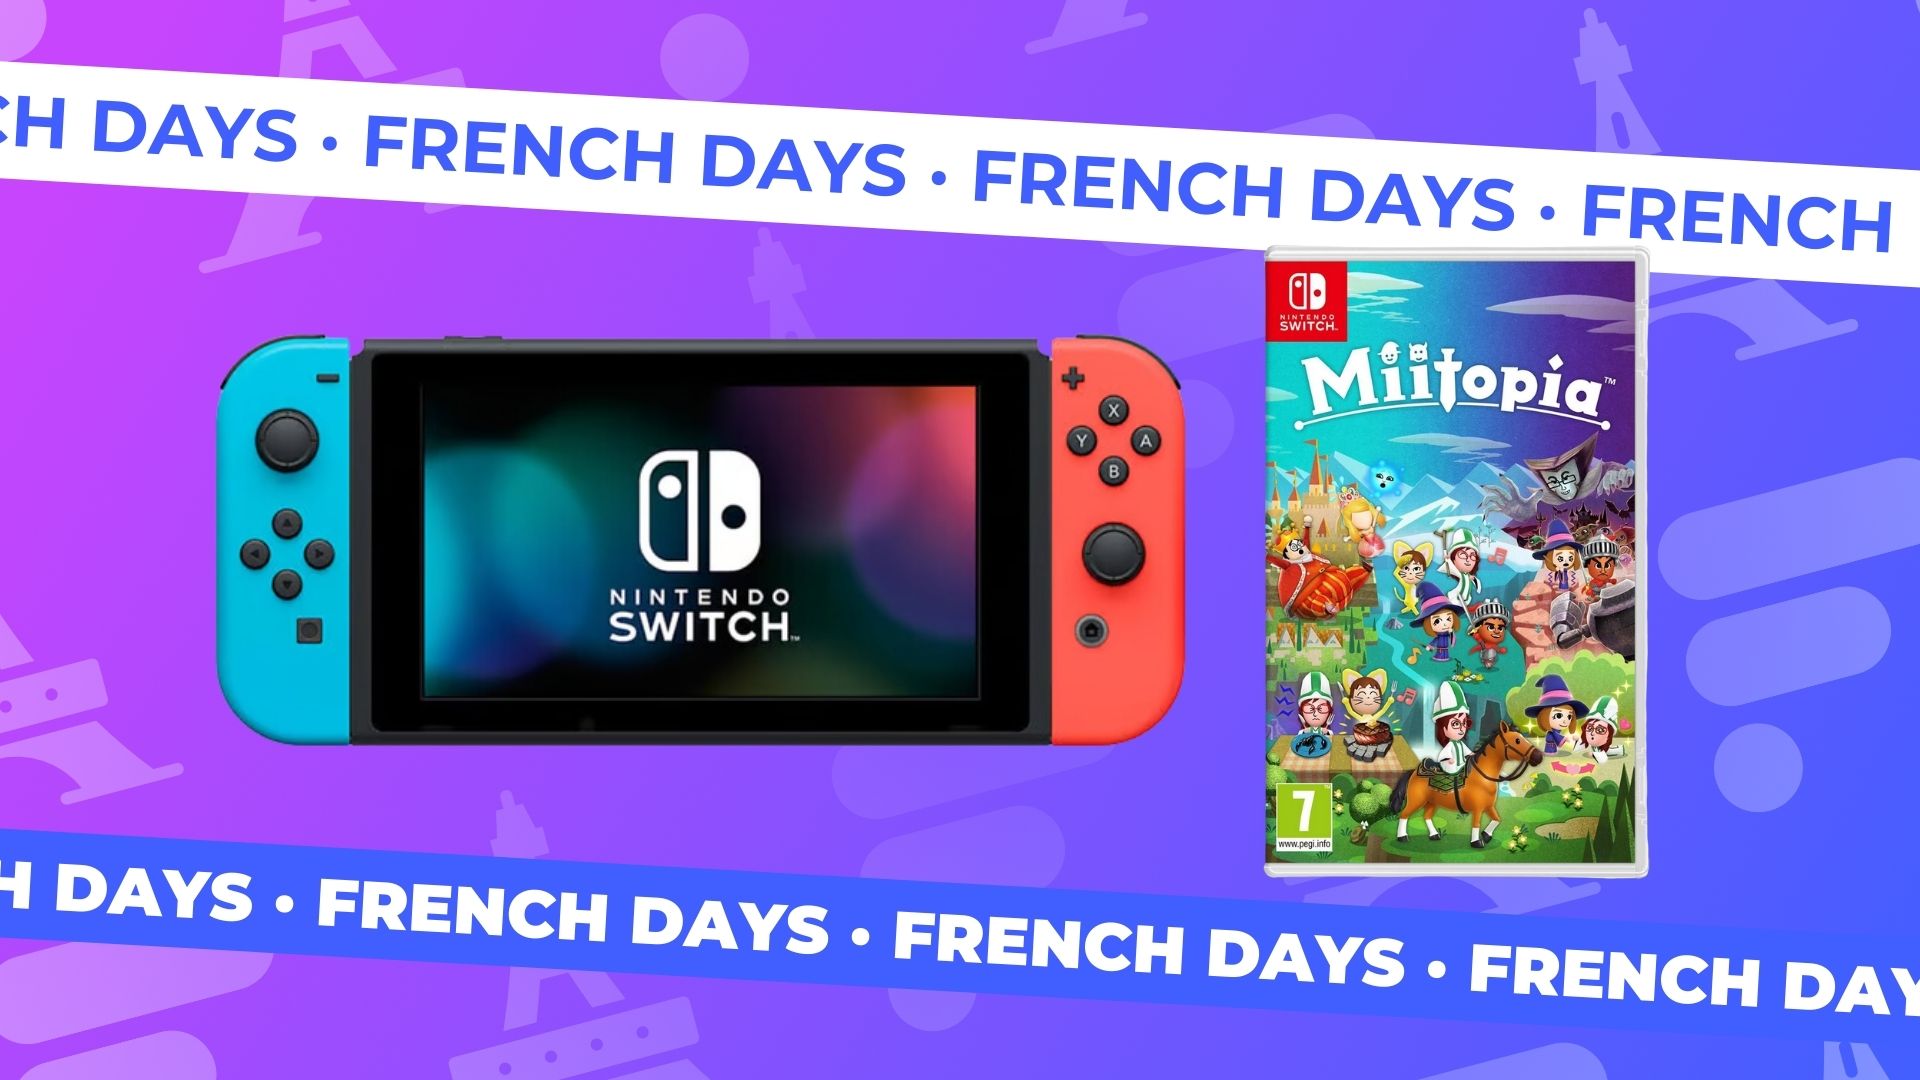 Cdiscount is offering a very nice offer for Nintendo Switch during France Days.